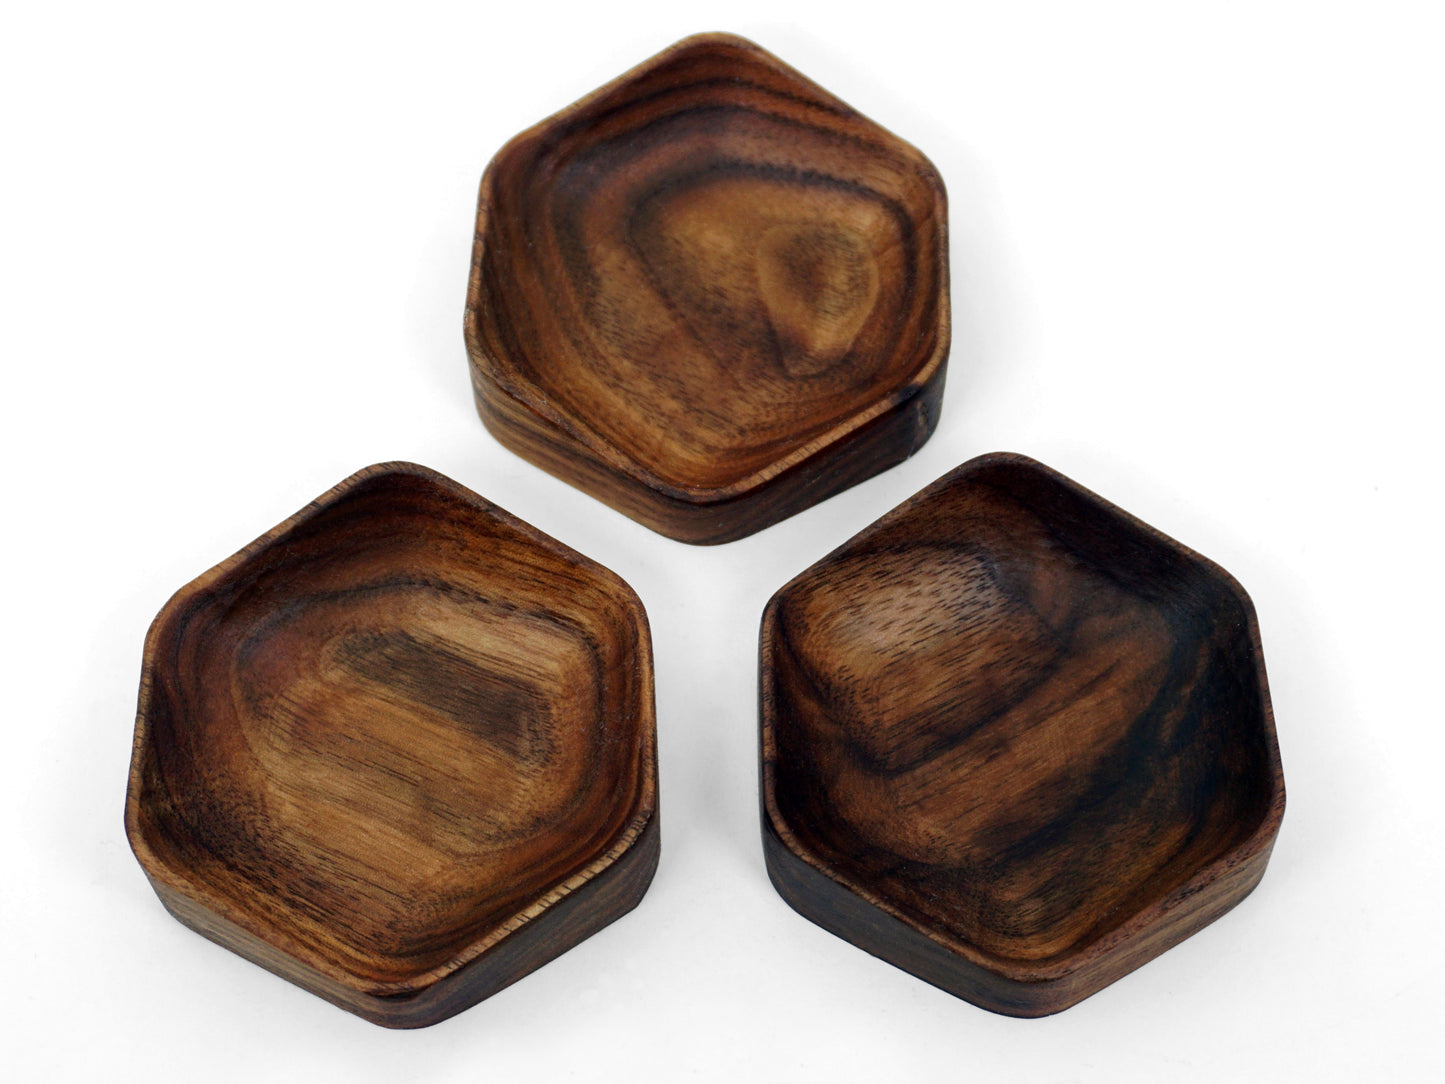 Group of small wooden ring dishes in a hexagonal shape